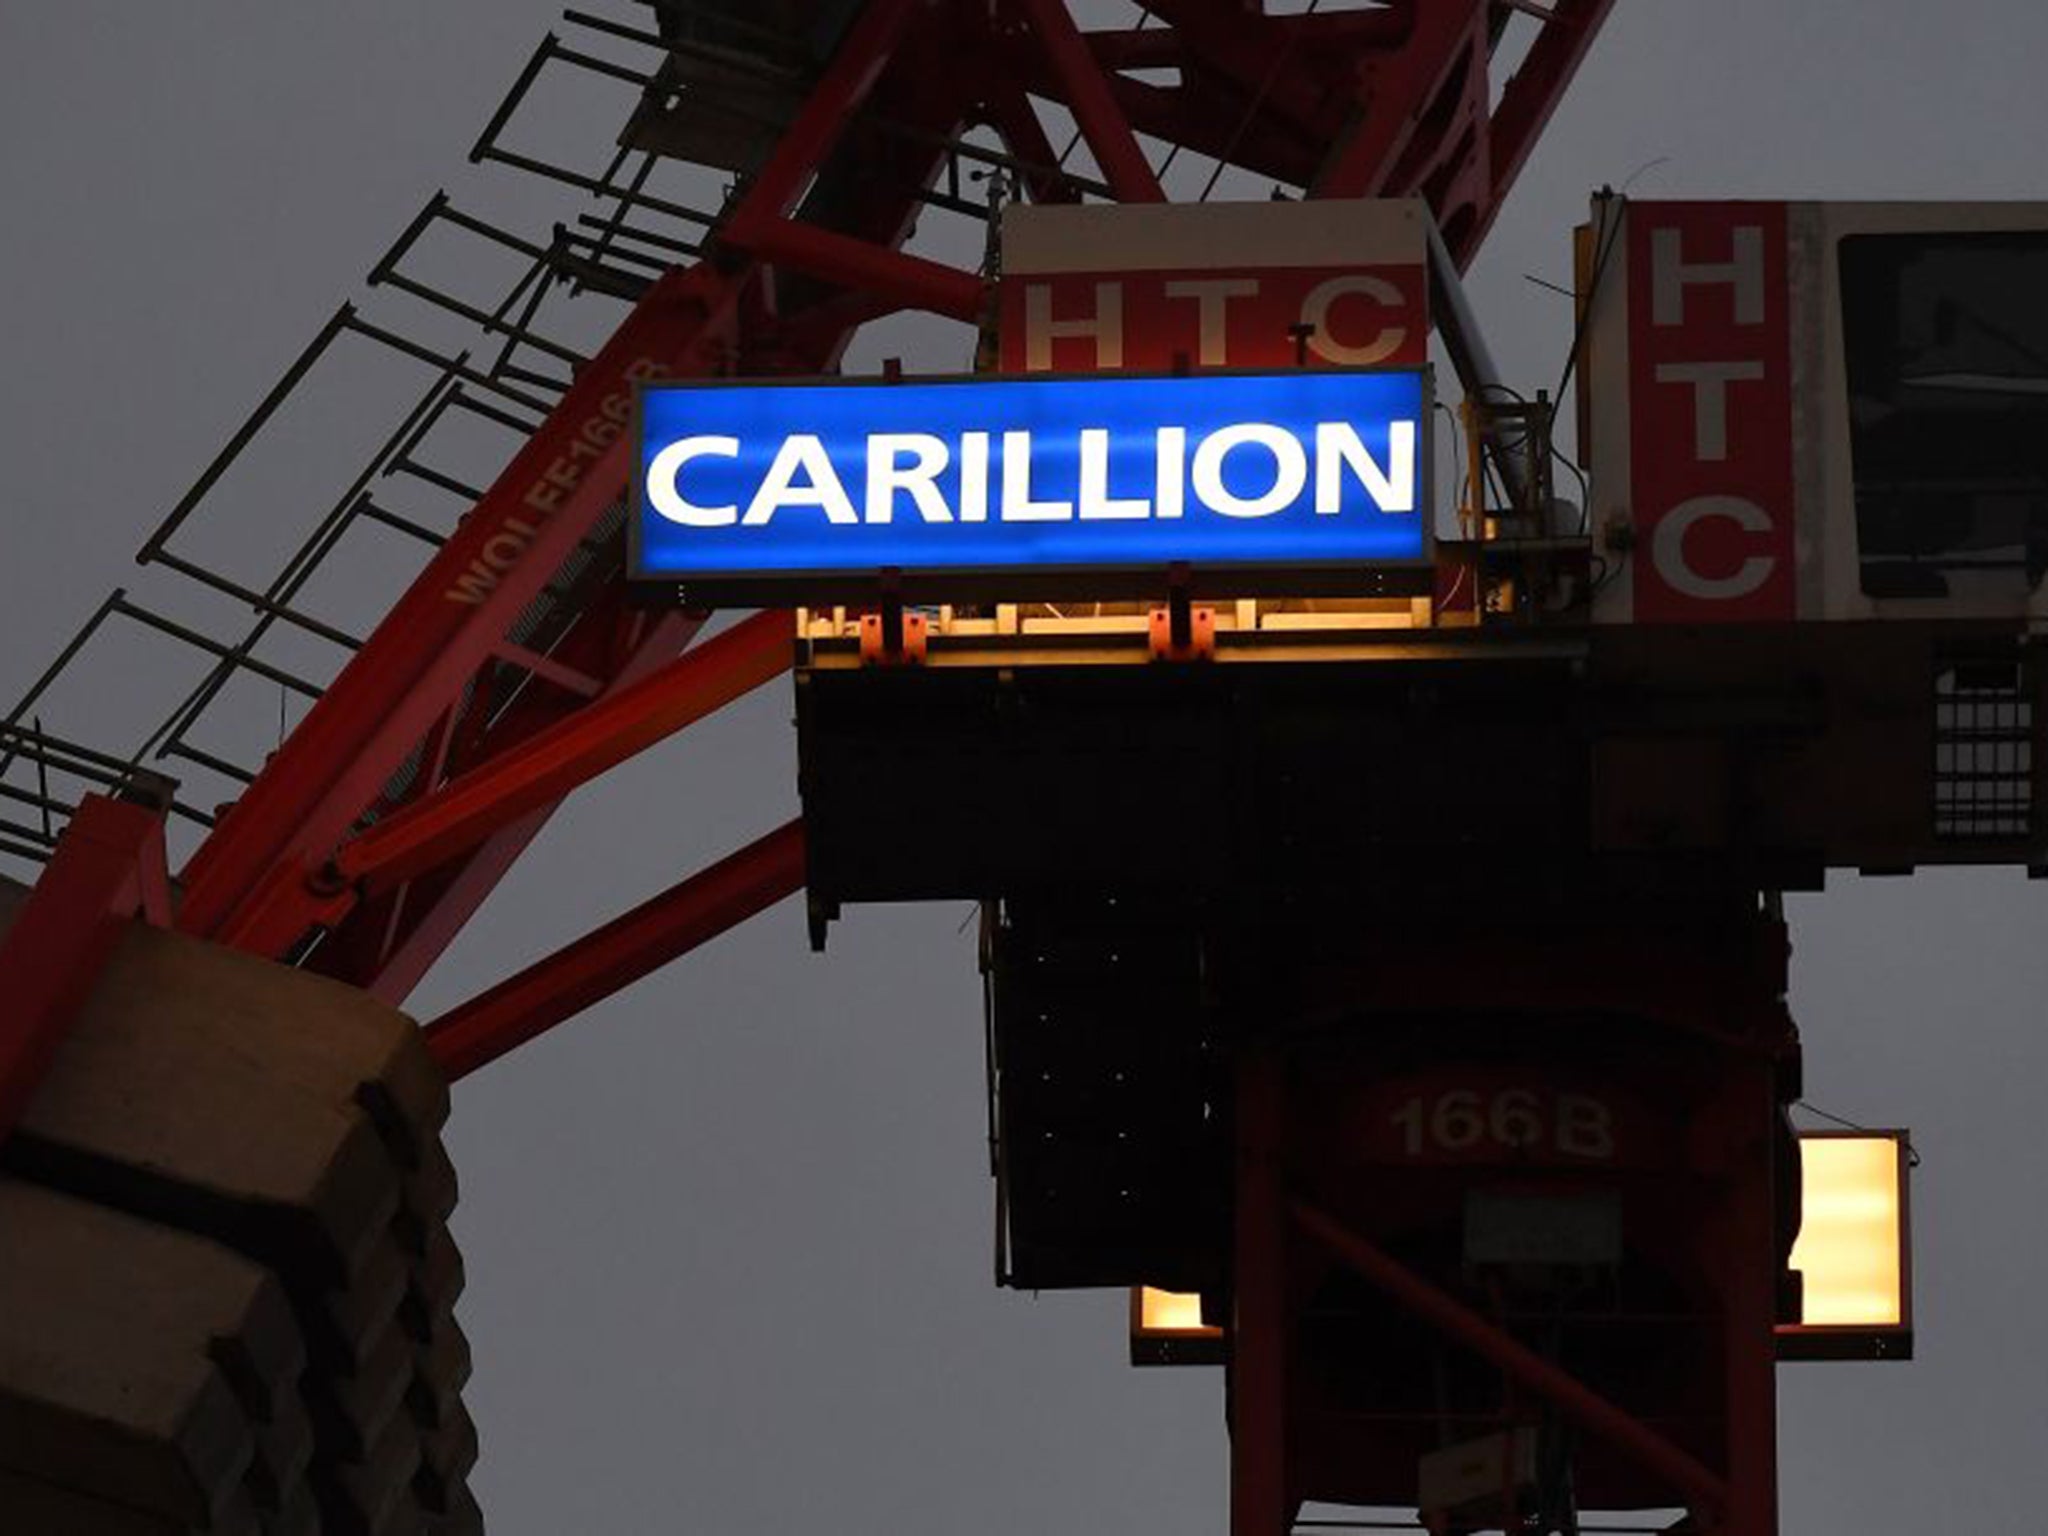 The collapse of Carillion is expected to dominate Prime Minister's Questions in the Commons on Wednesday